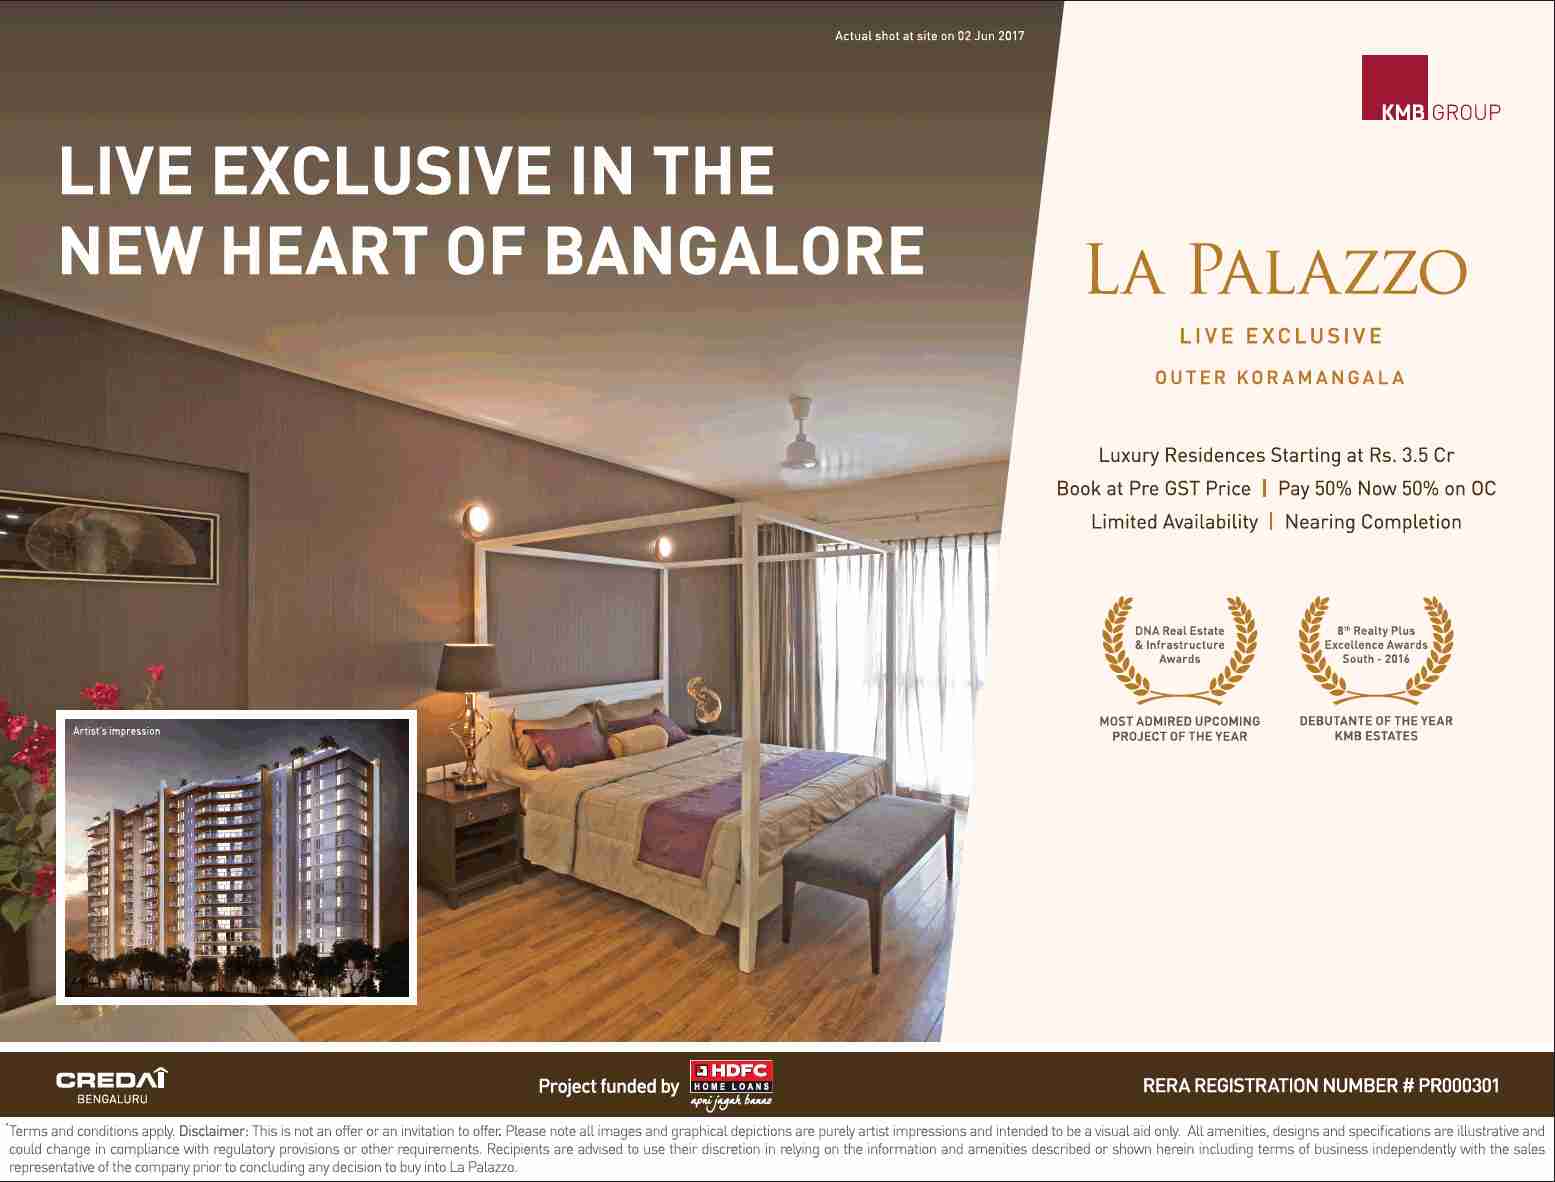 Live exclusive in the new heart of Bangalore at KMB La Palazzo Update